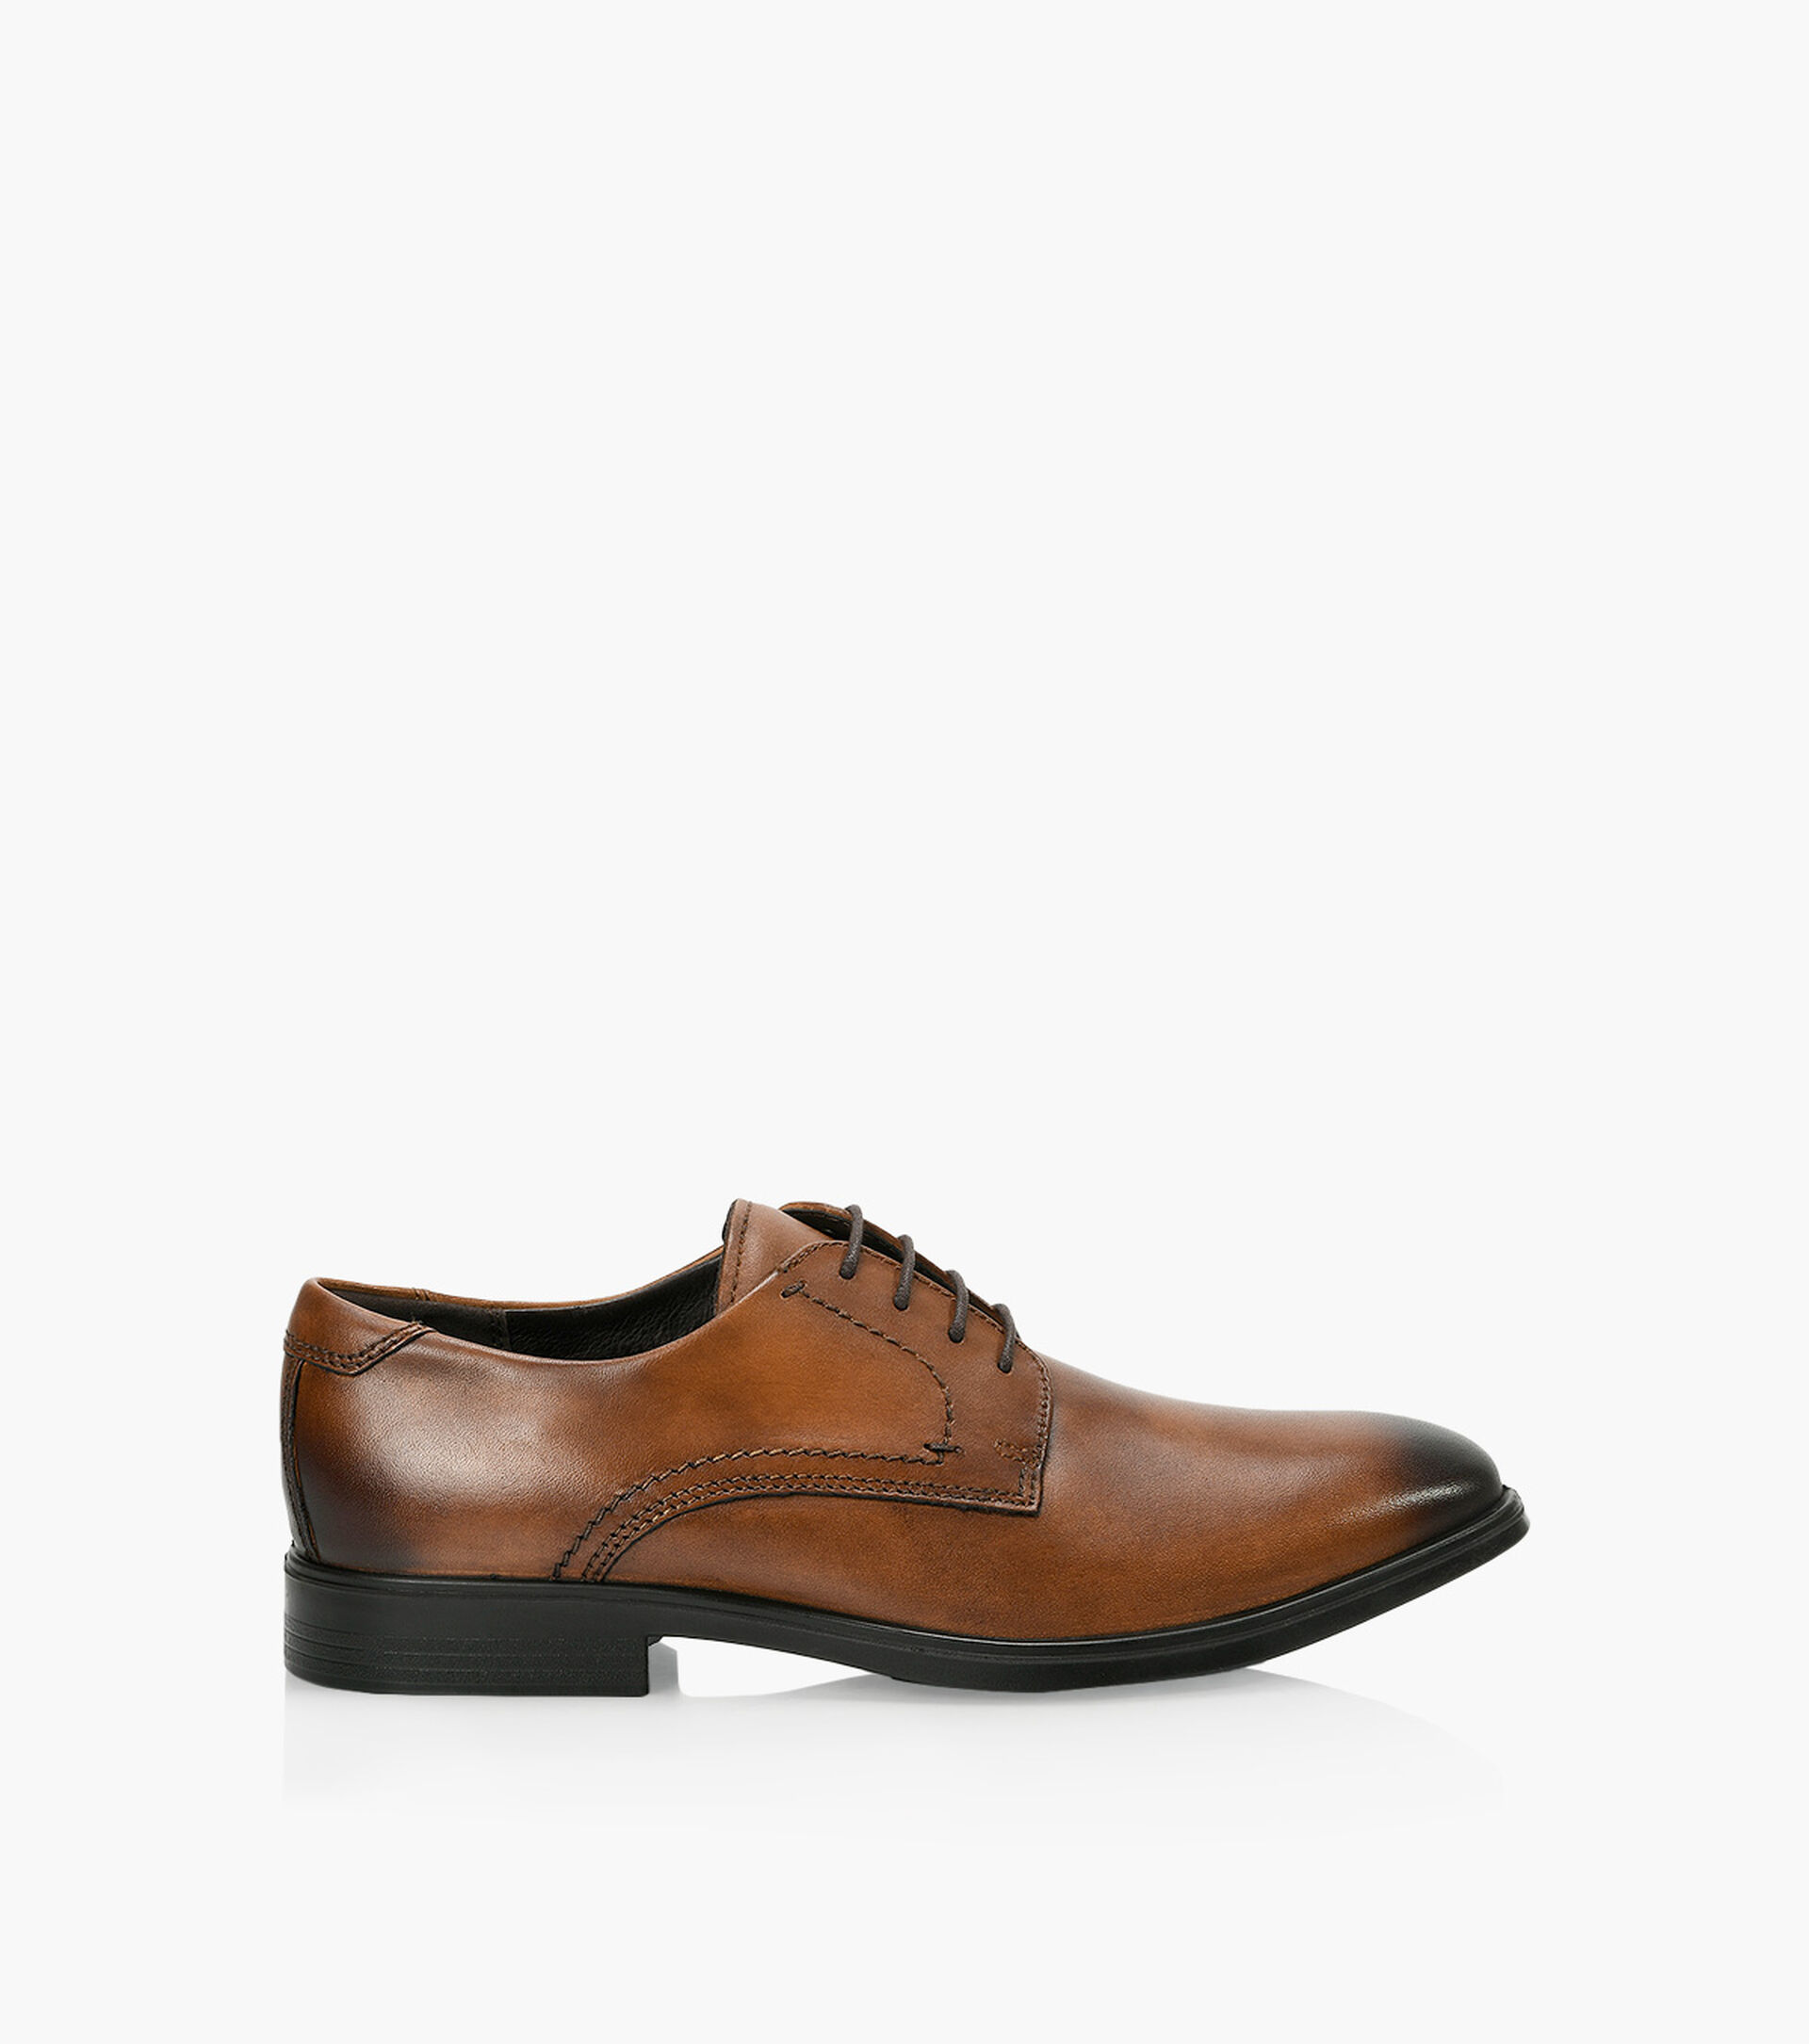 ECCO MELBOURNE DERBY - Leather | Browns Shoes